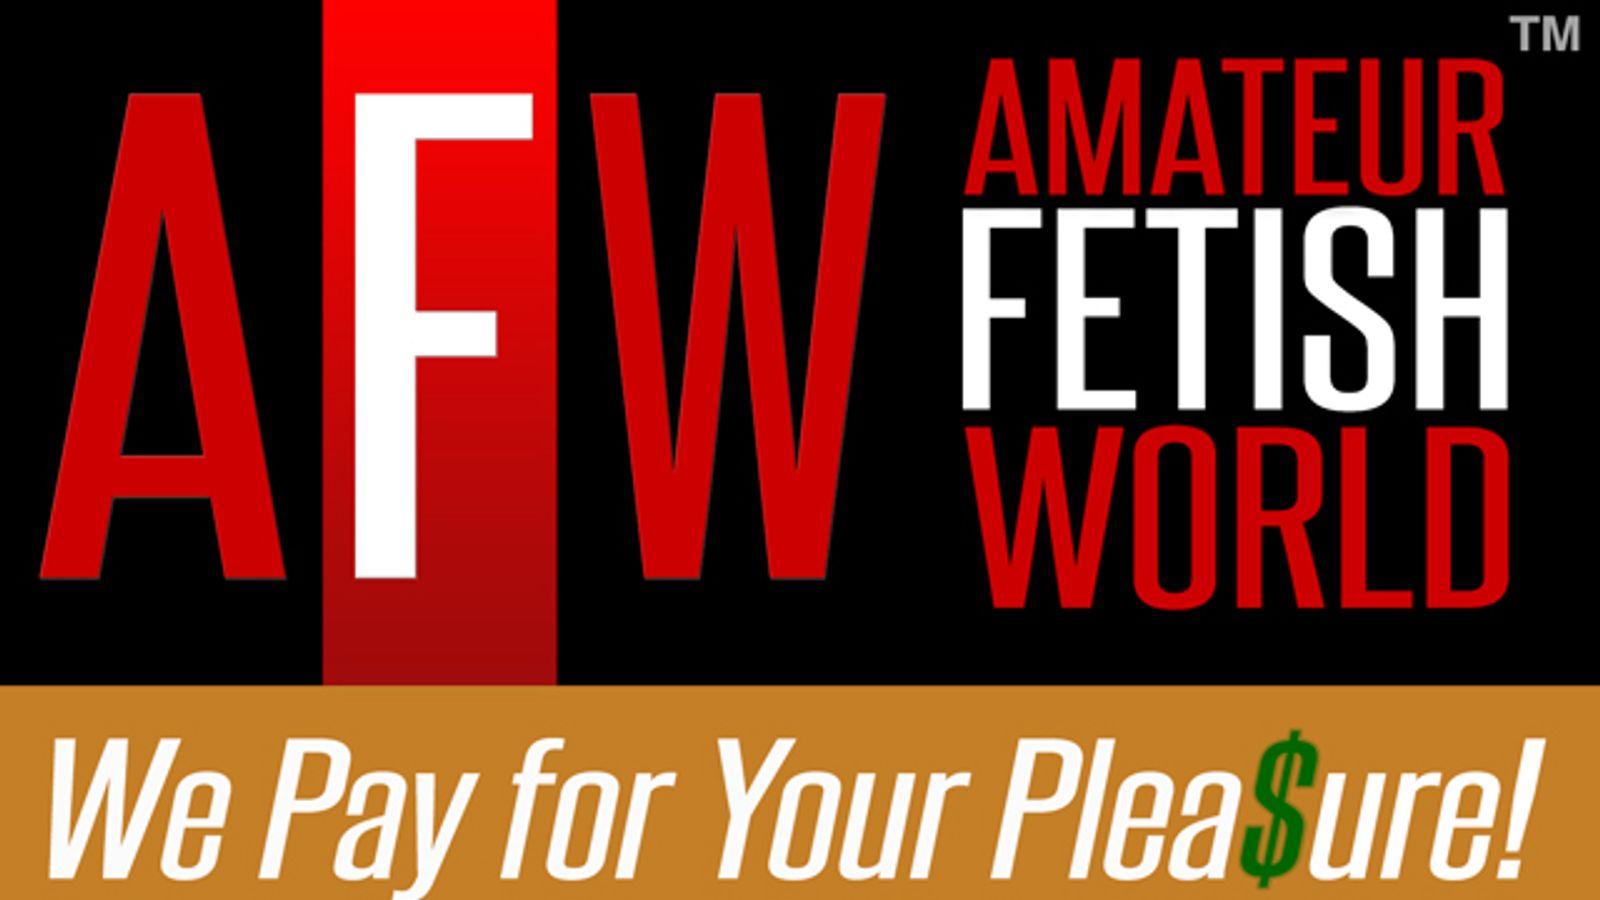 Amateur Fetish World is Paying for Pleasure